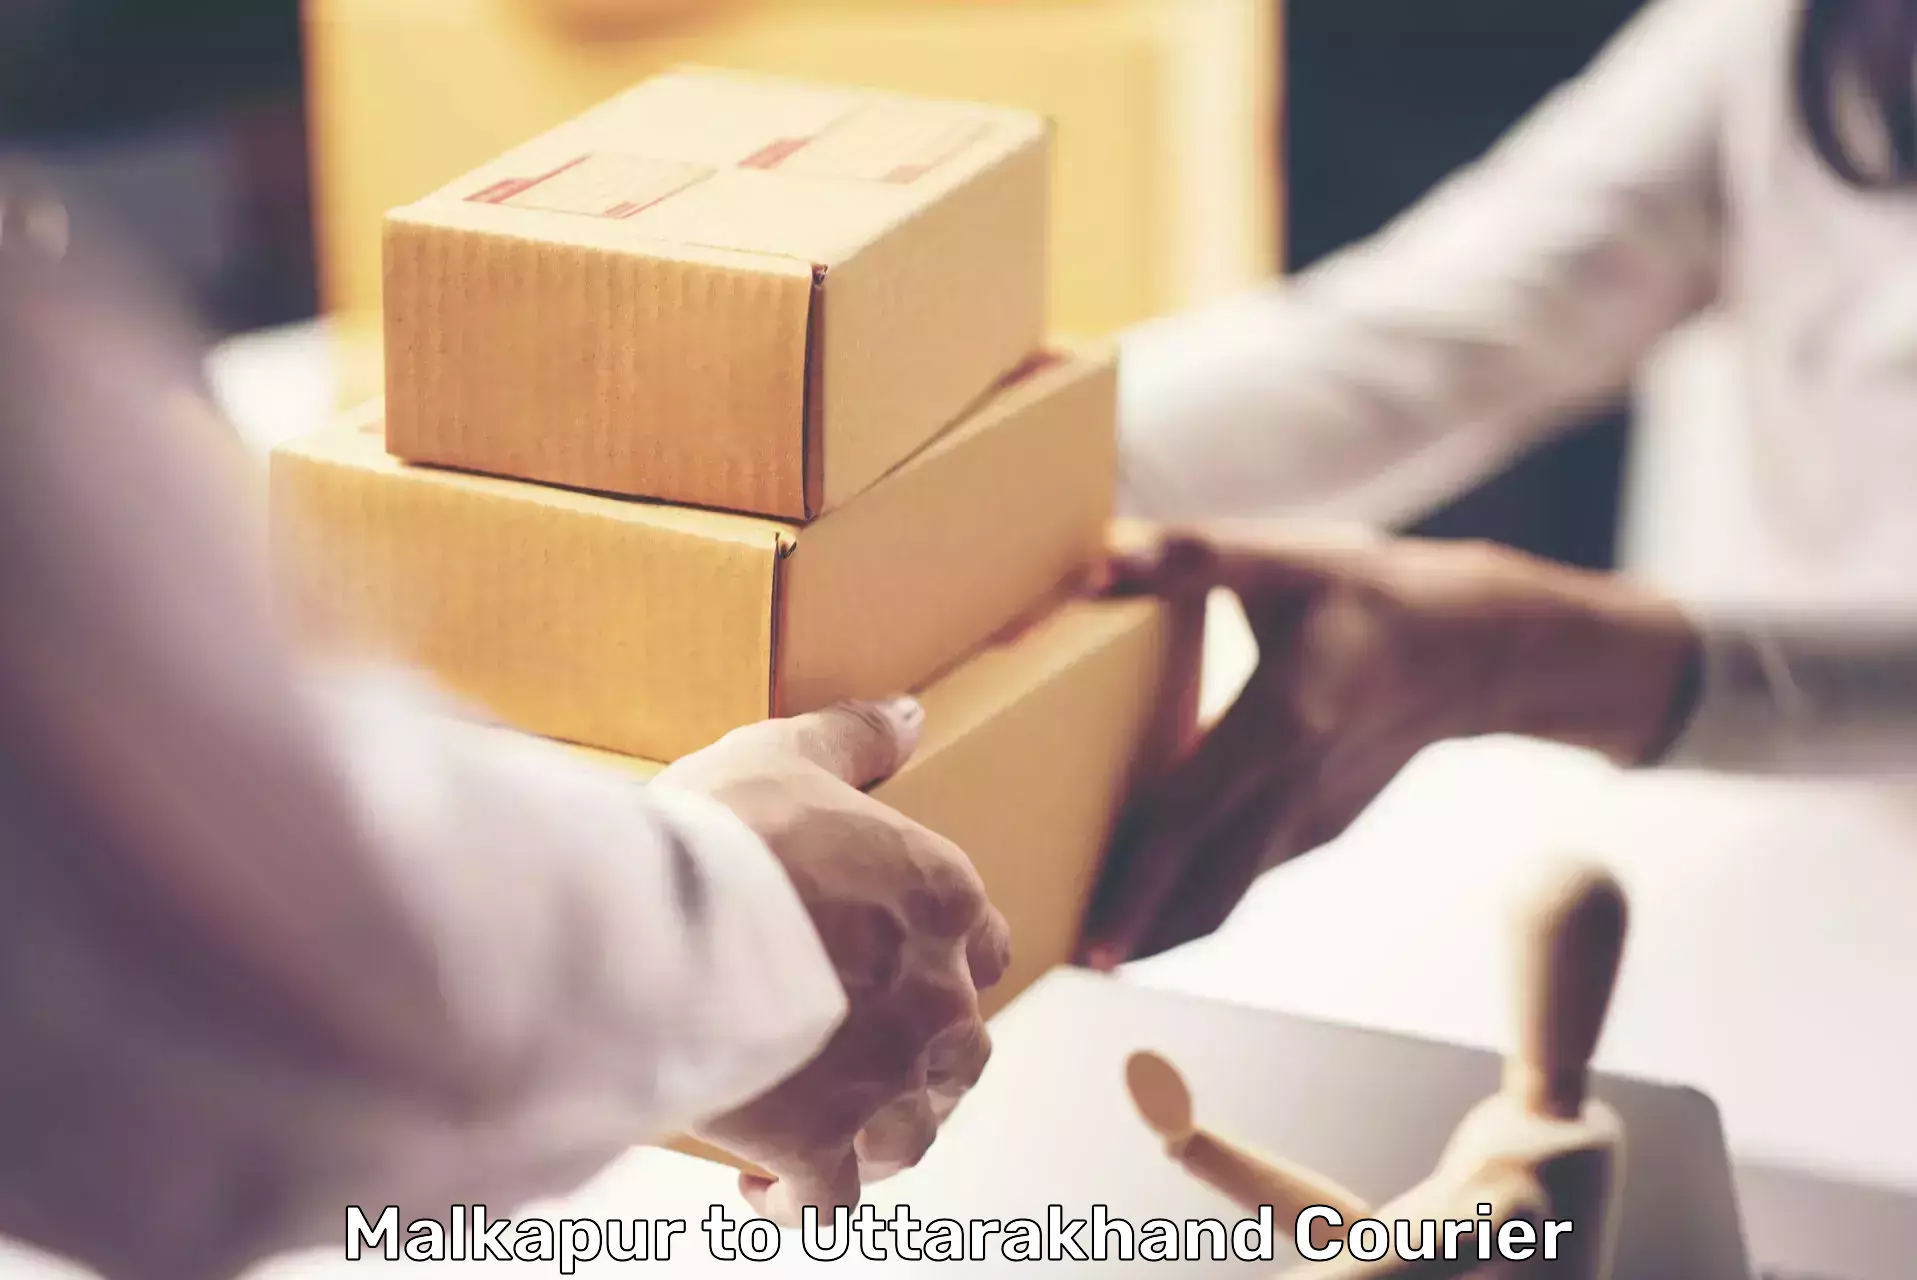 Customer-oriented courier services in Malkapur to Uttarakhand